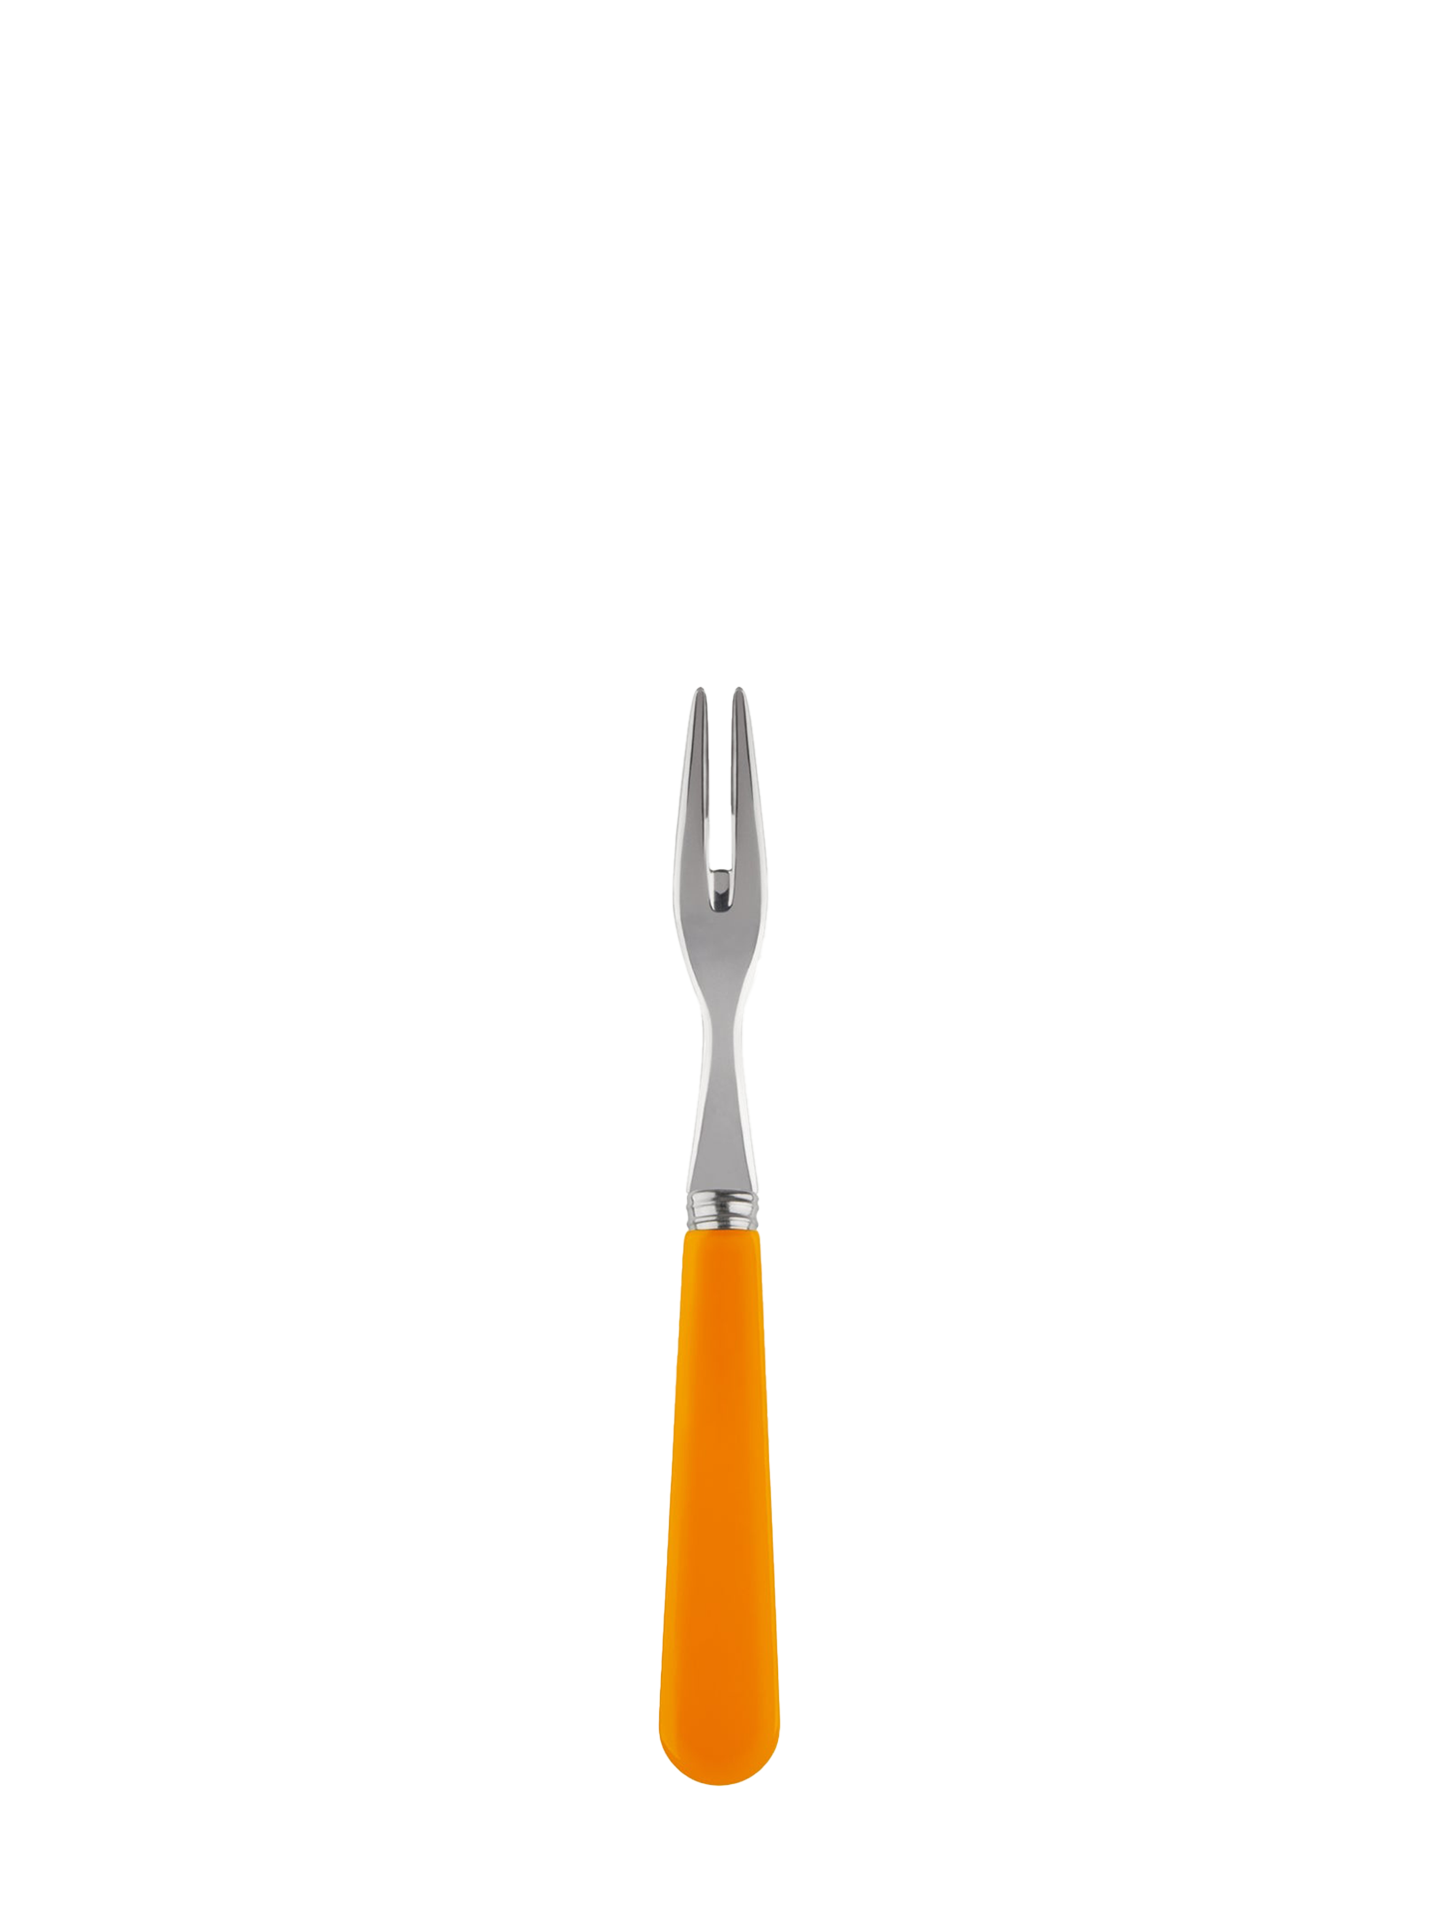 The bright orange cocktail fork from the Duo series by Sabre Paris is summer's must-have!